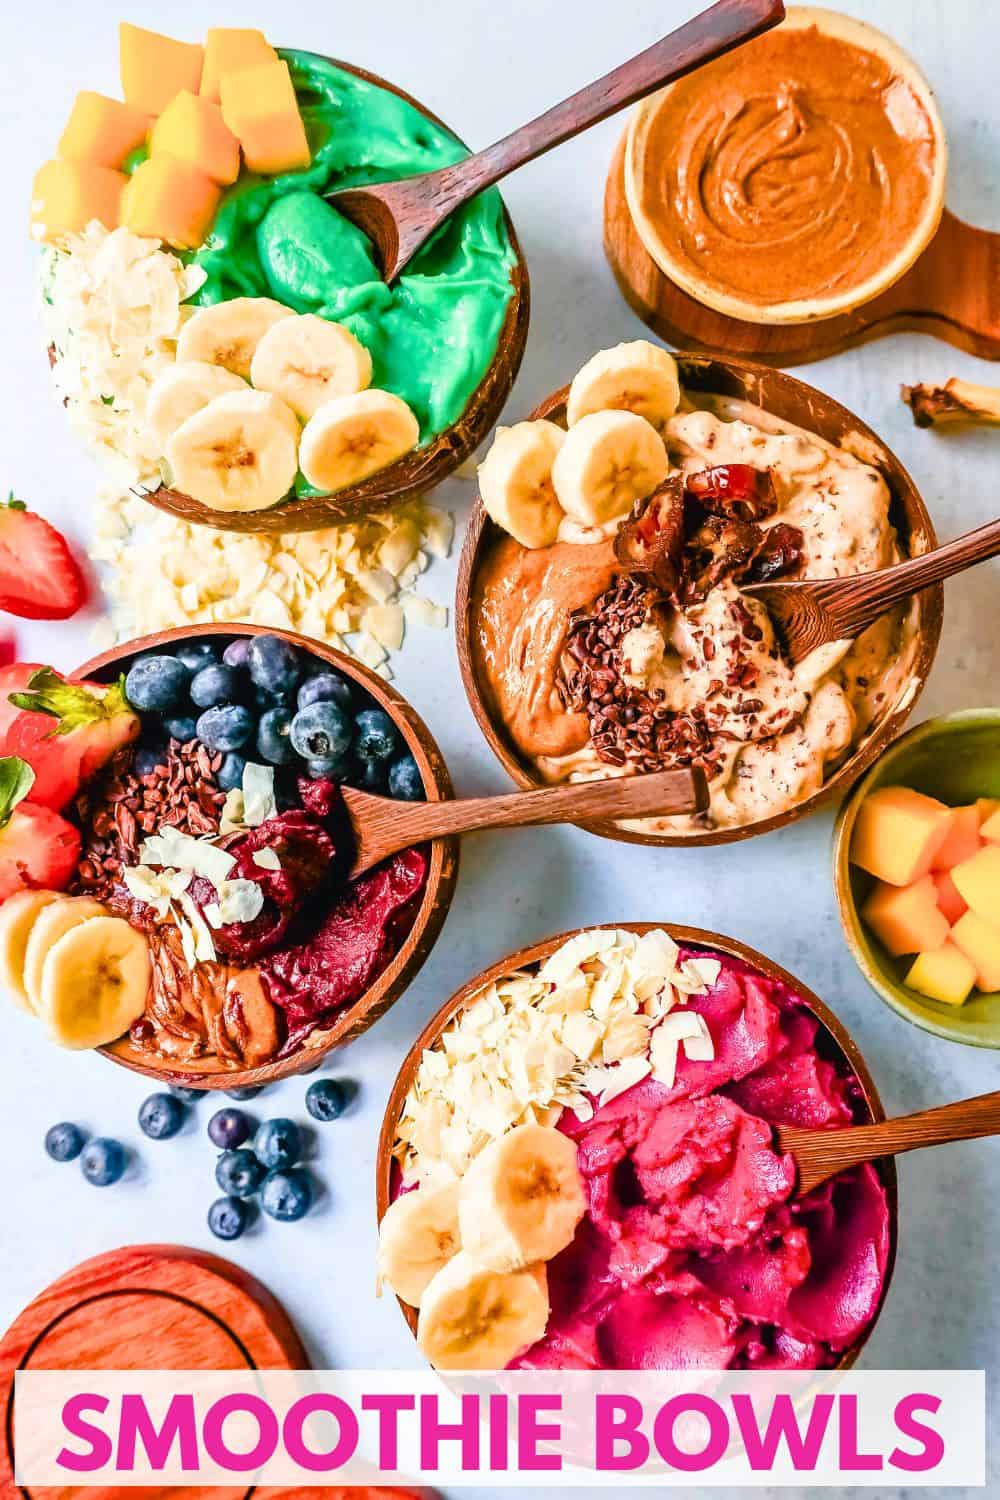 How to make a thick, creamy, fruity smoothie bowl at home. Here are all of the tips and tricks for making the best smoothie bowls. I am sharing 4 smoothie bowl recipes -- acai smoothie bowl, pitaya dragonfruit smoothie bowl, chocolate peanut butter banana smoothie bowl, and blue tropical pineapple coconut smoothie bowl.